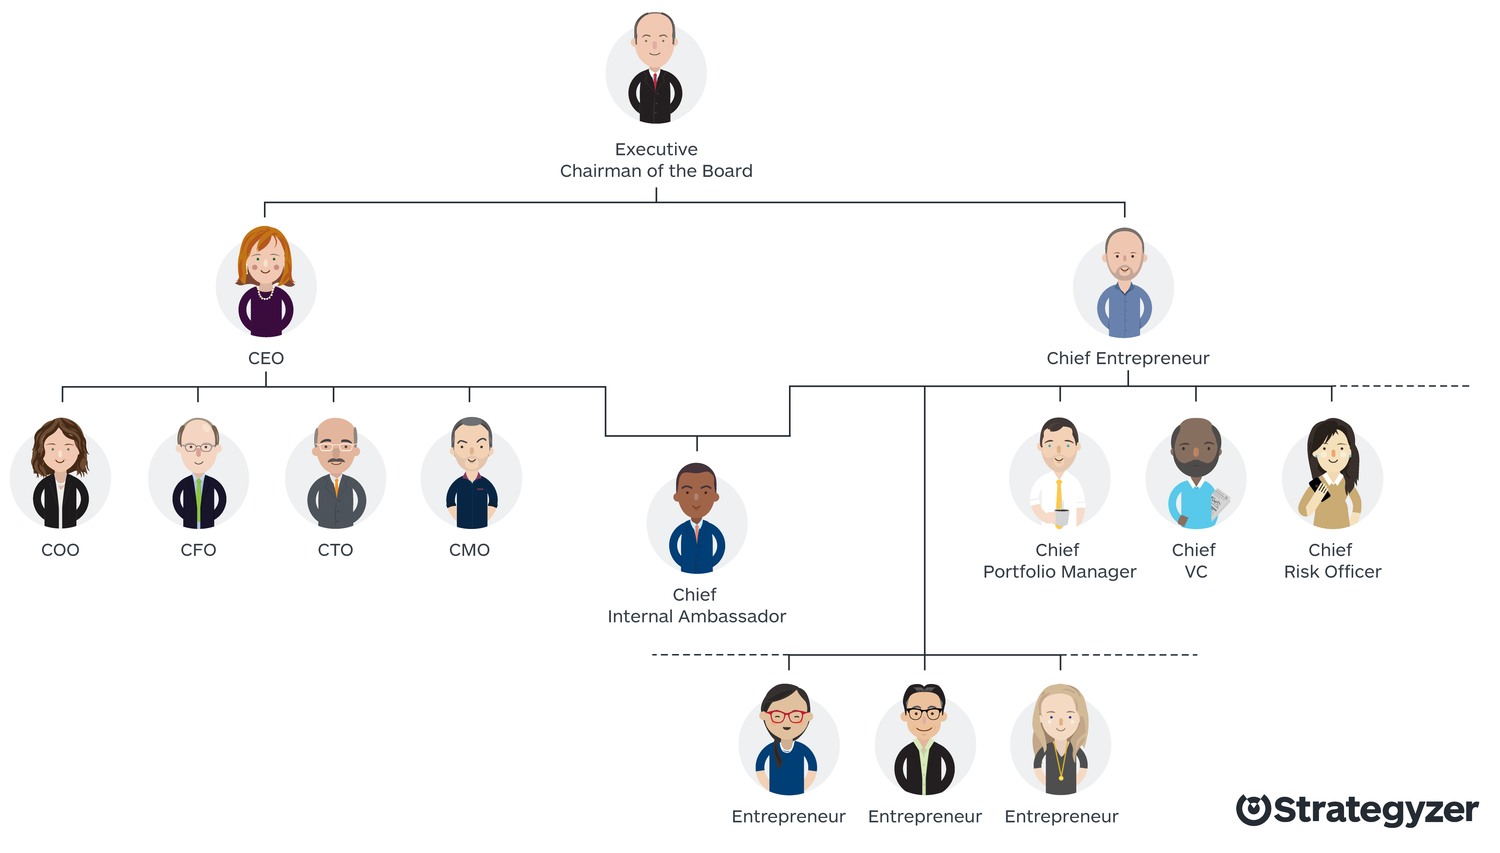 The org chart where CEO and CE lead the charge. I